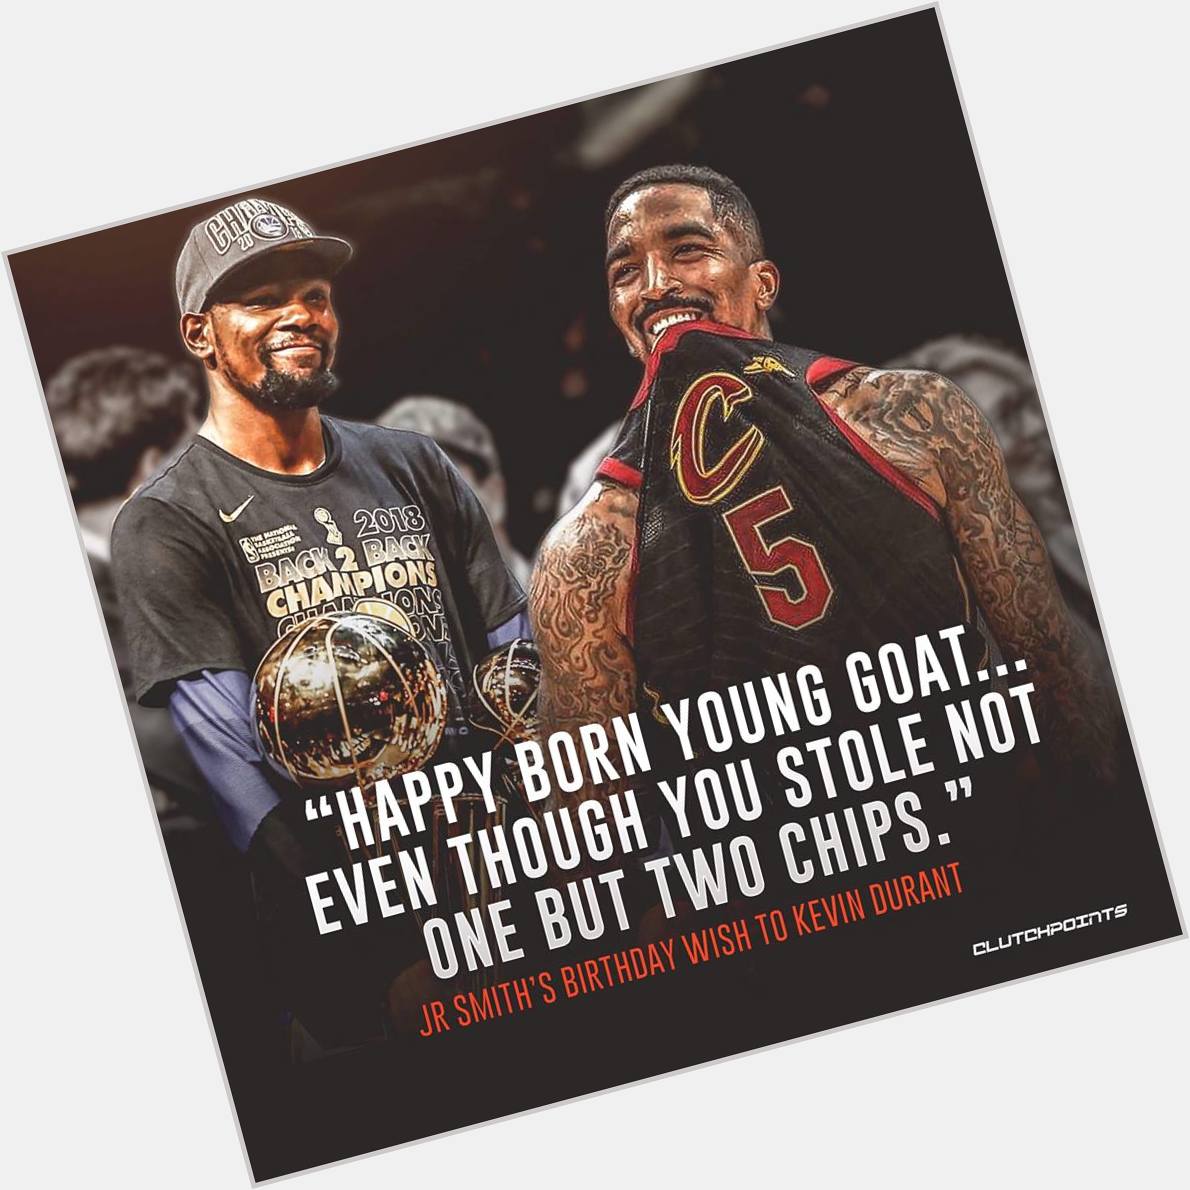 JR Smith ( ) wishes Kevin Durant ( ) a Happy Birthday while also throwing some shade. 